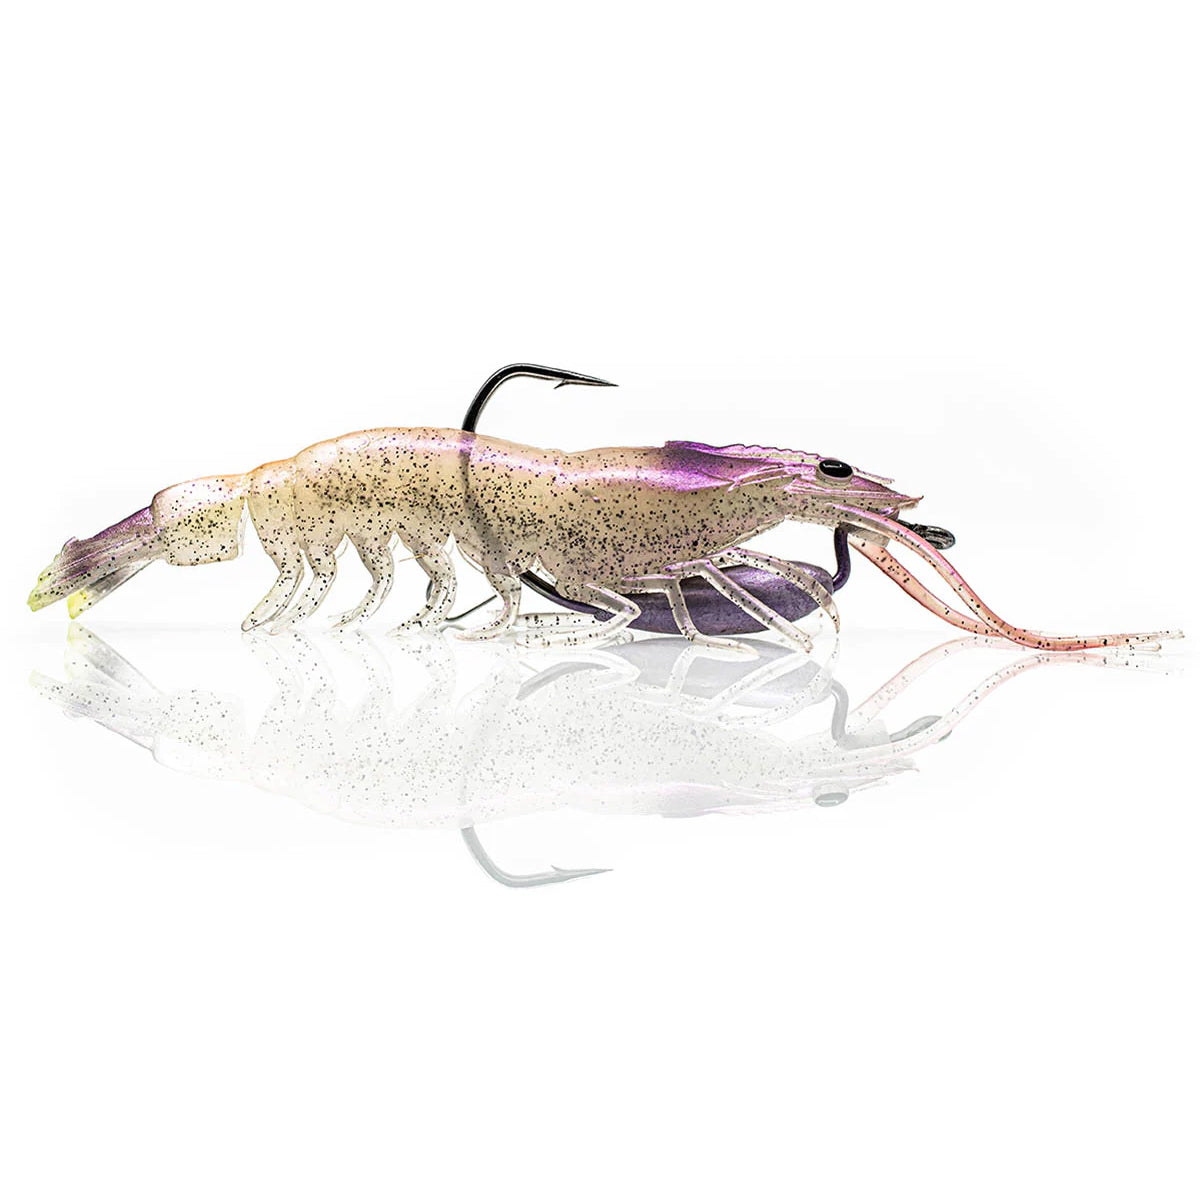 Chase Baits Flick Prawn 125 - Compleat Angler Nedlands Pro Tackle